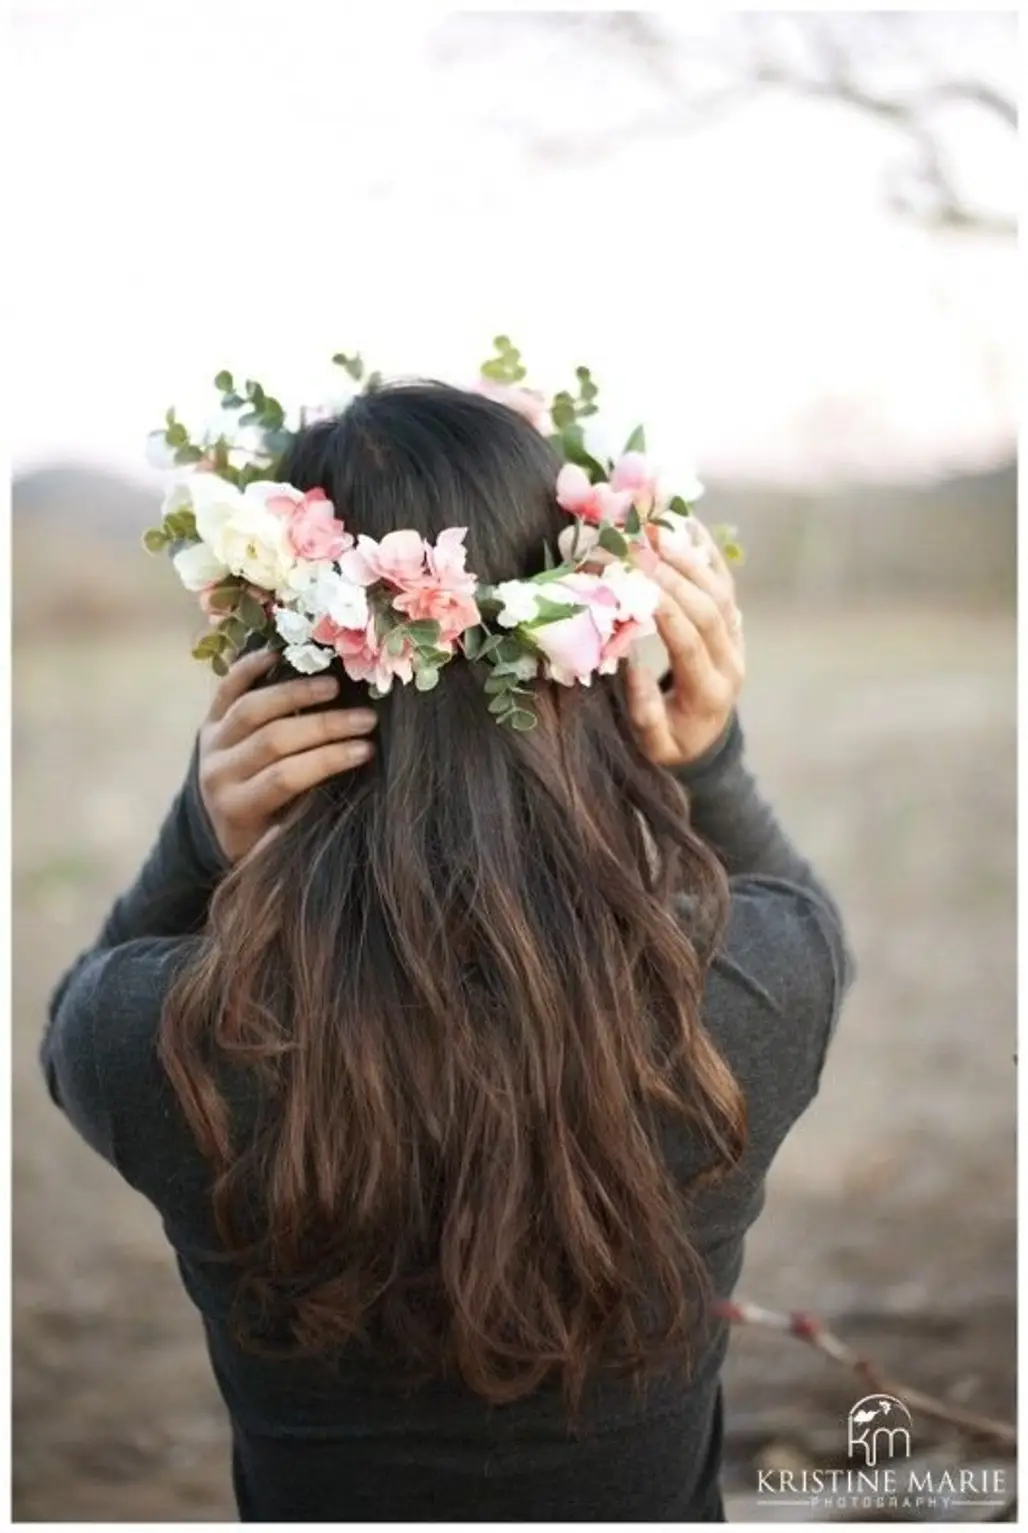 Where Would You Wear This Flower Crown?